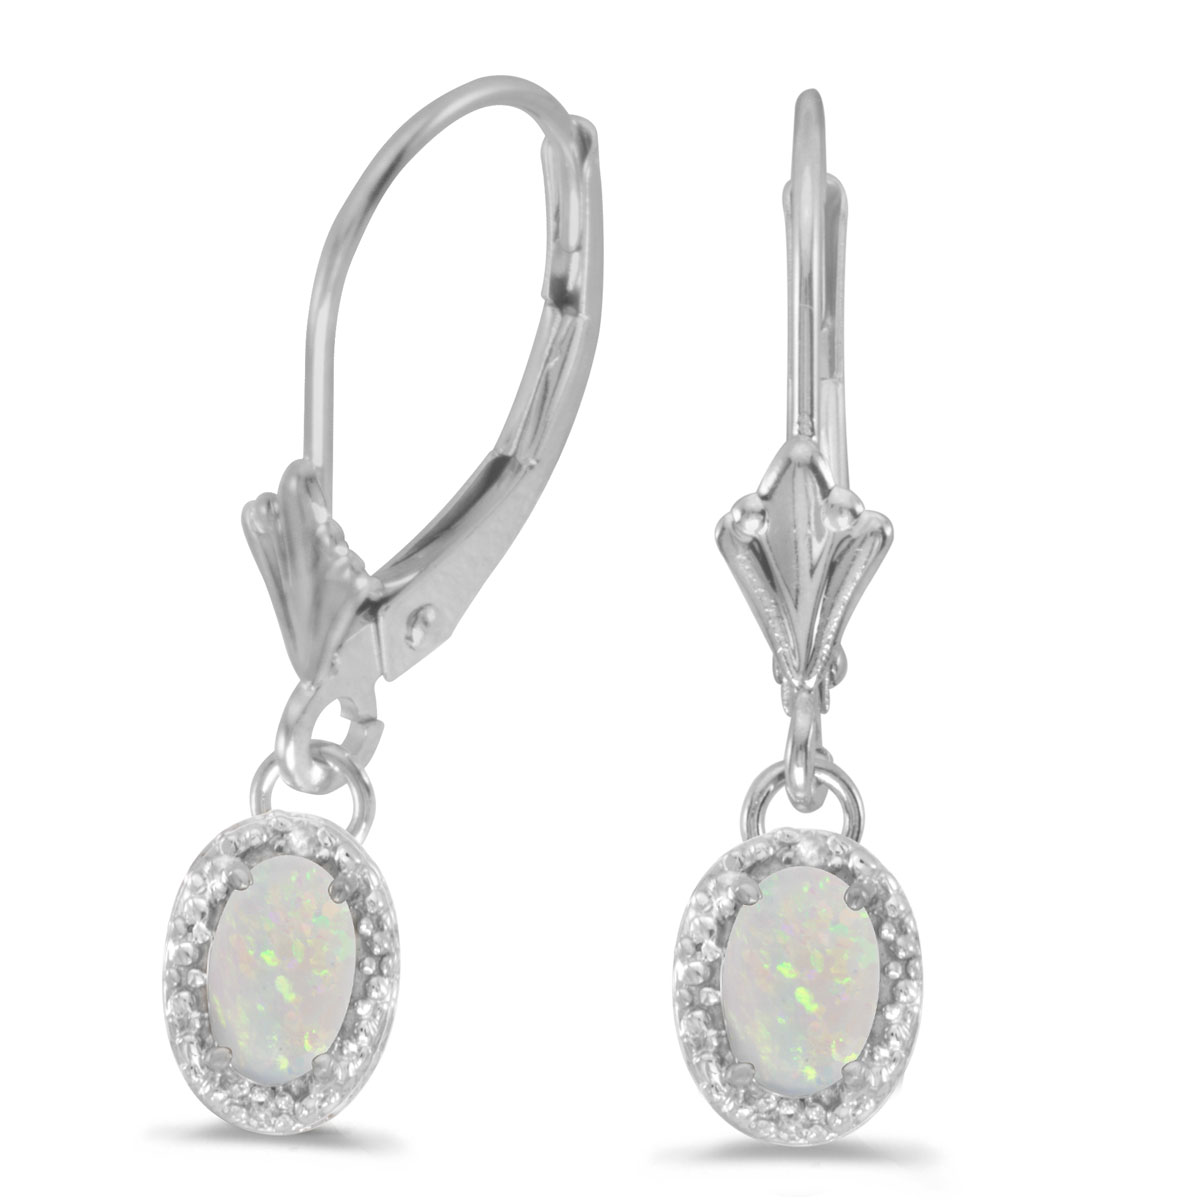 JCX2129: Beautiful 10k white gold leverback earrings with mesmerizing  6x4 mm opals complemented with bright diamonds.